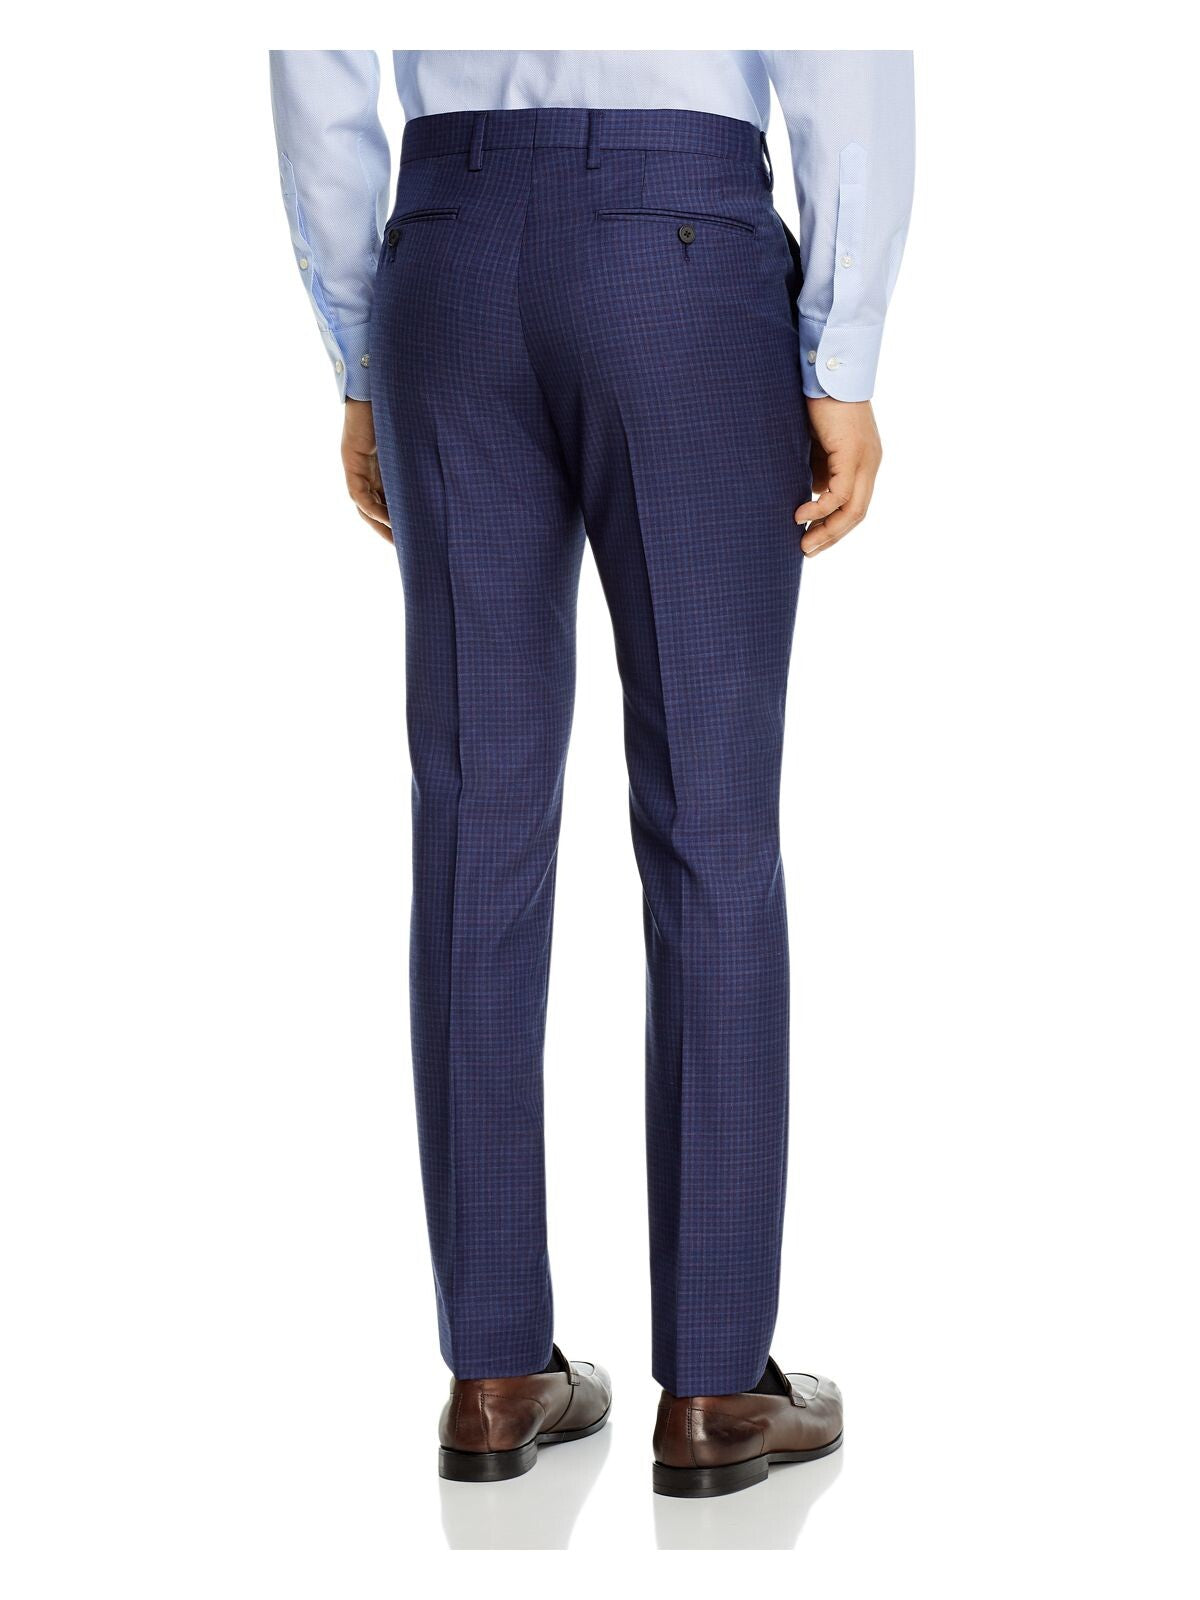 THEORY Mens Blue Flat Front, Check Slim Fit Pants 32